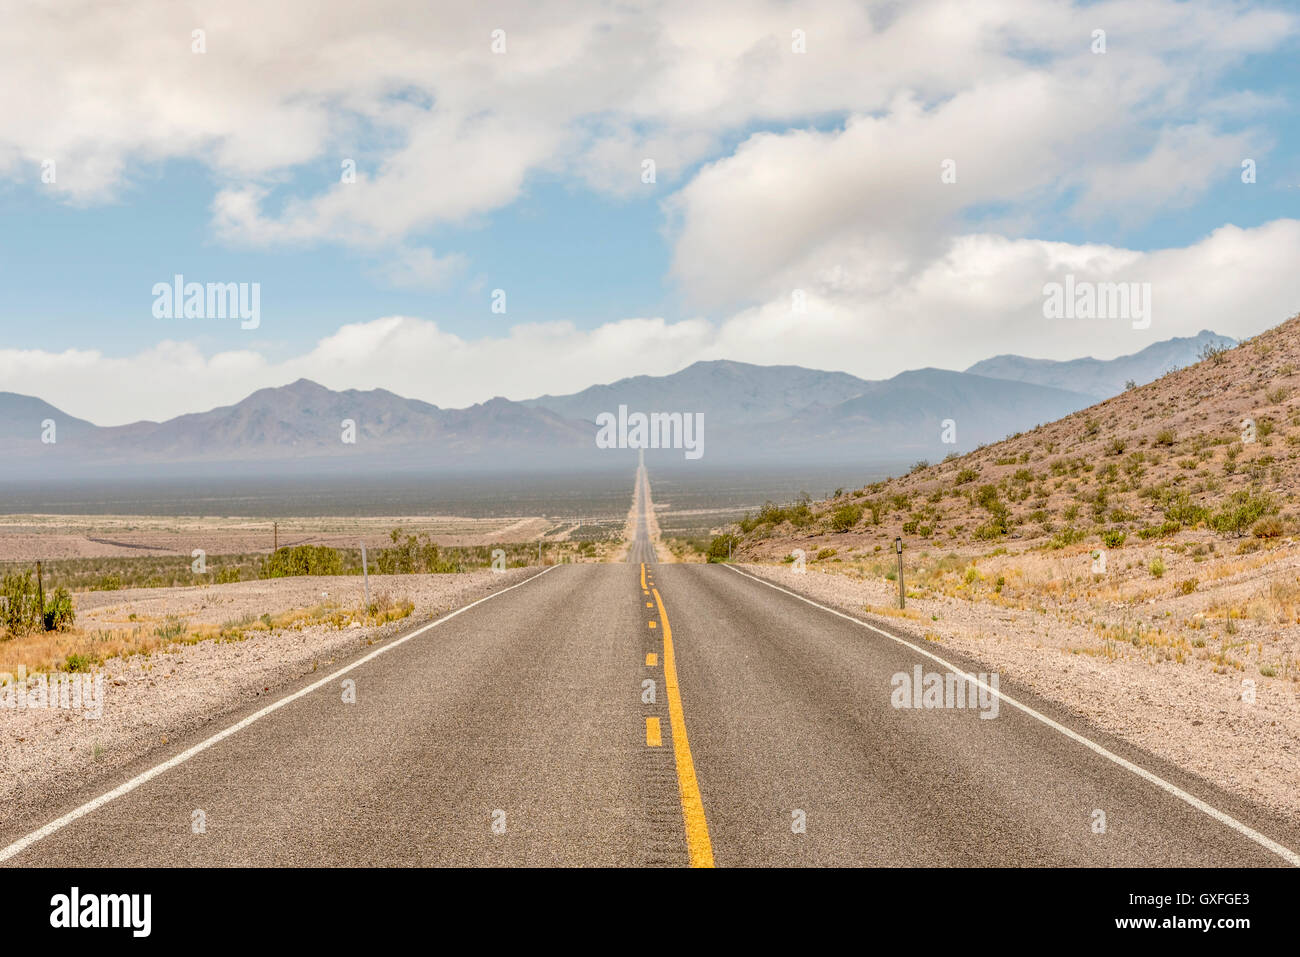 Landscape of Long road in death valley national park for business goal concept Stock Photo